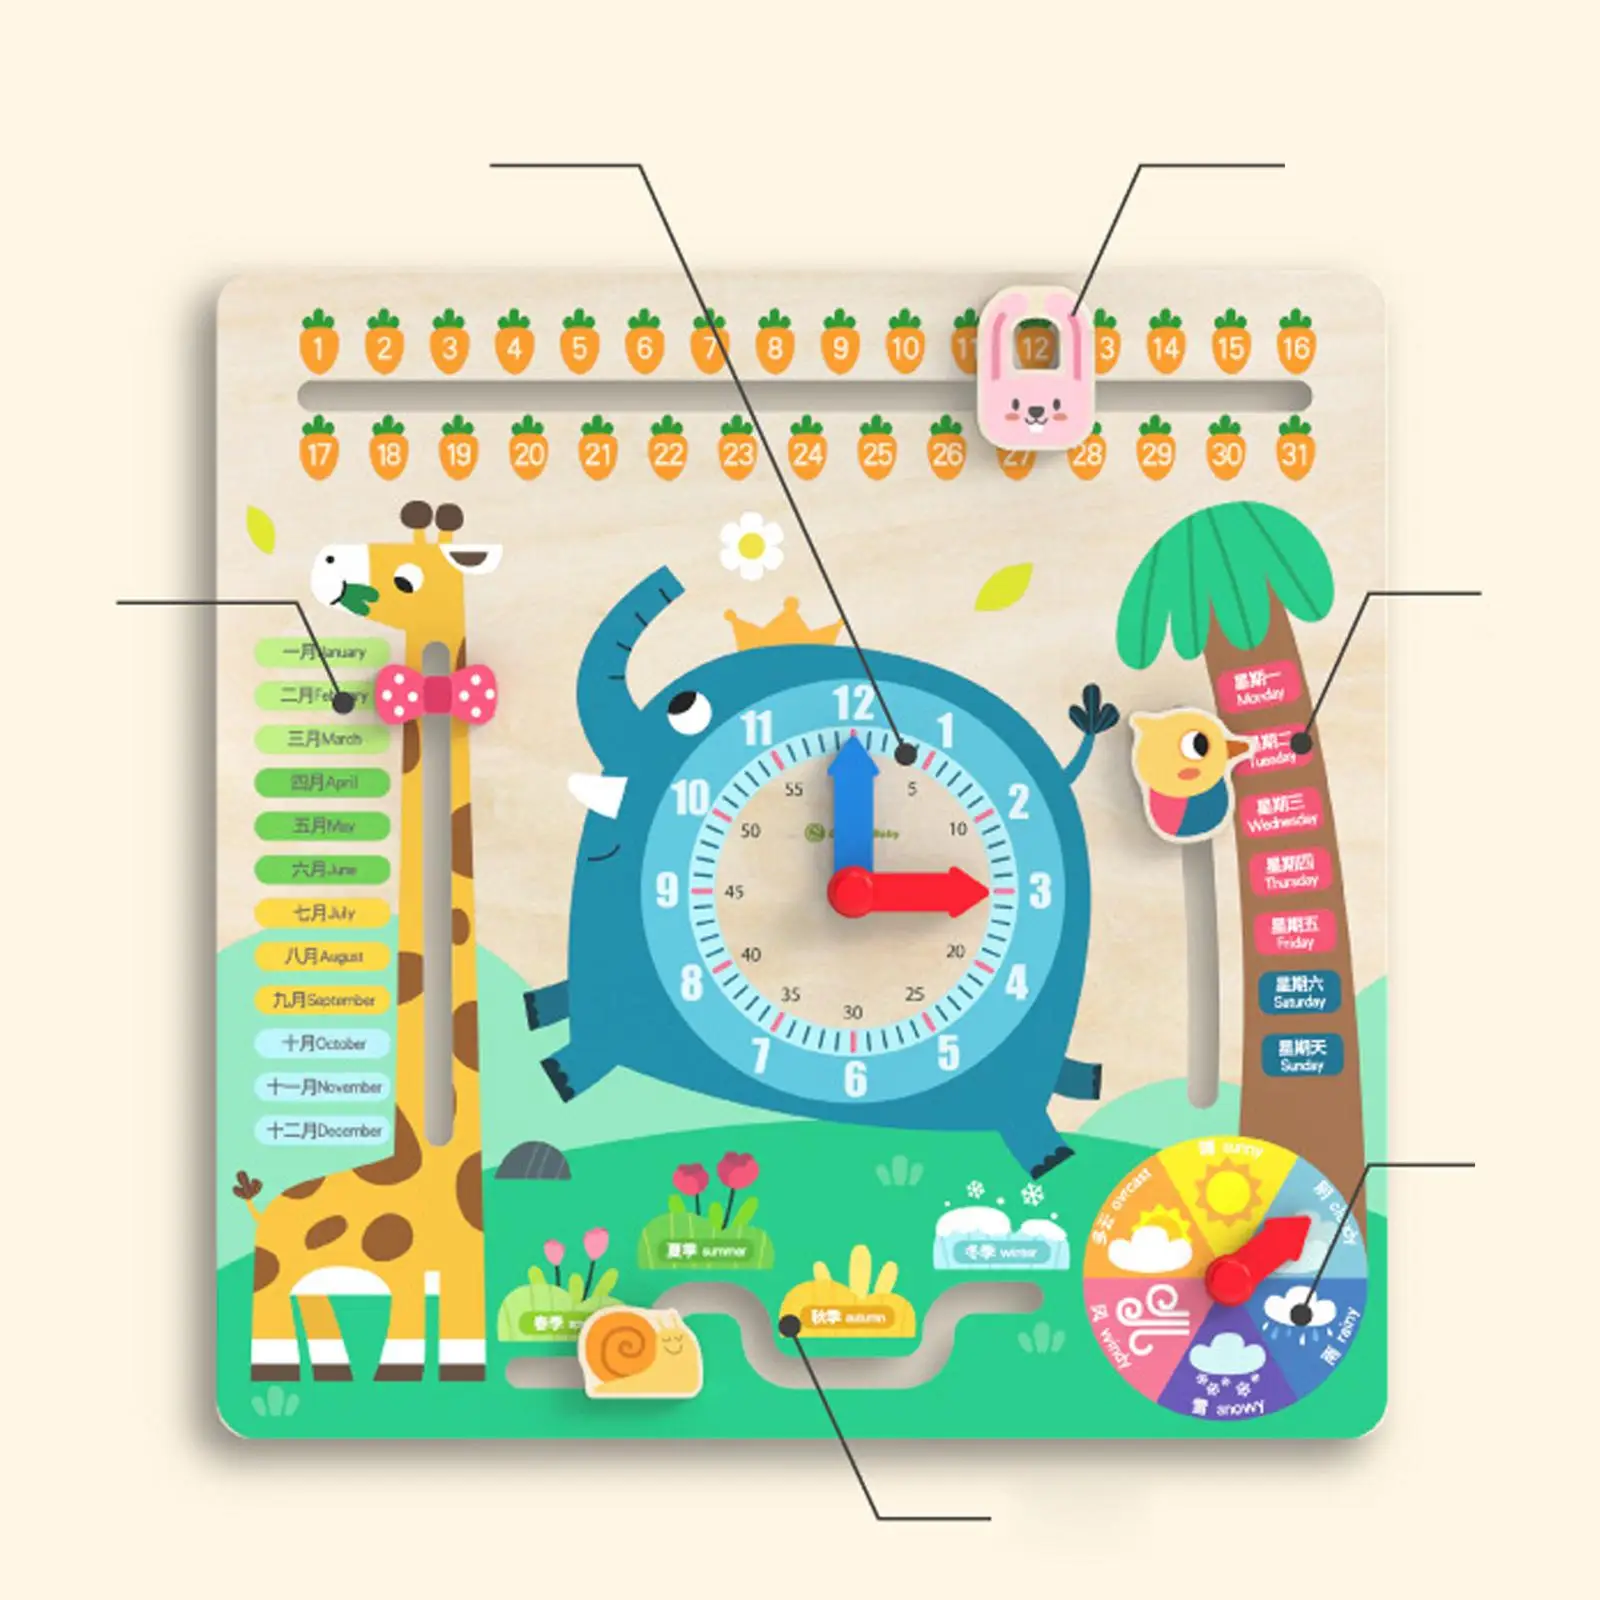 Wooden Calendar Clock Weather Season Time Cognitive Educational Puzzle Game Toy for Preschool Boy Girls Kids